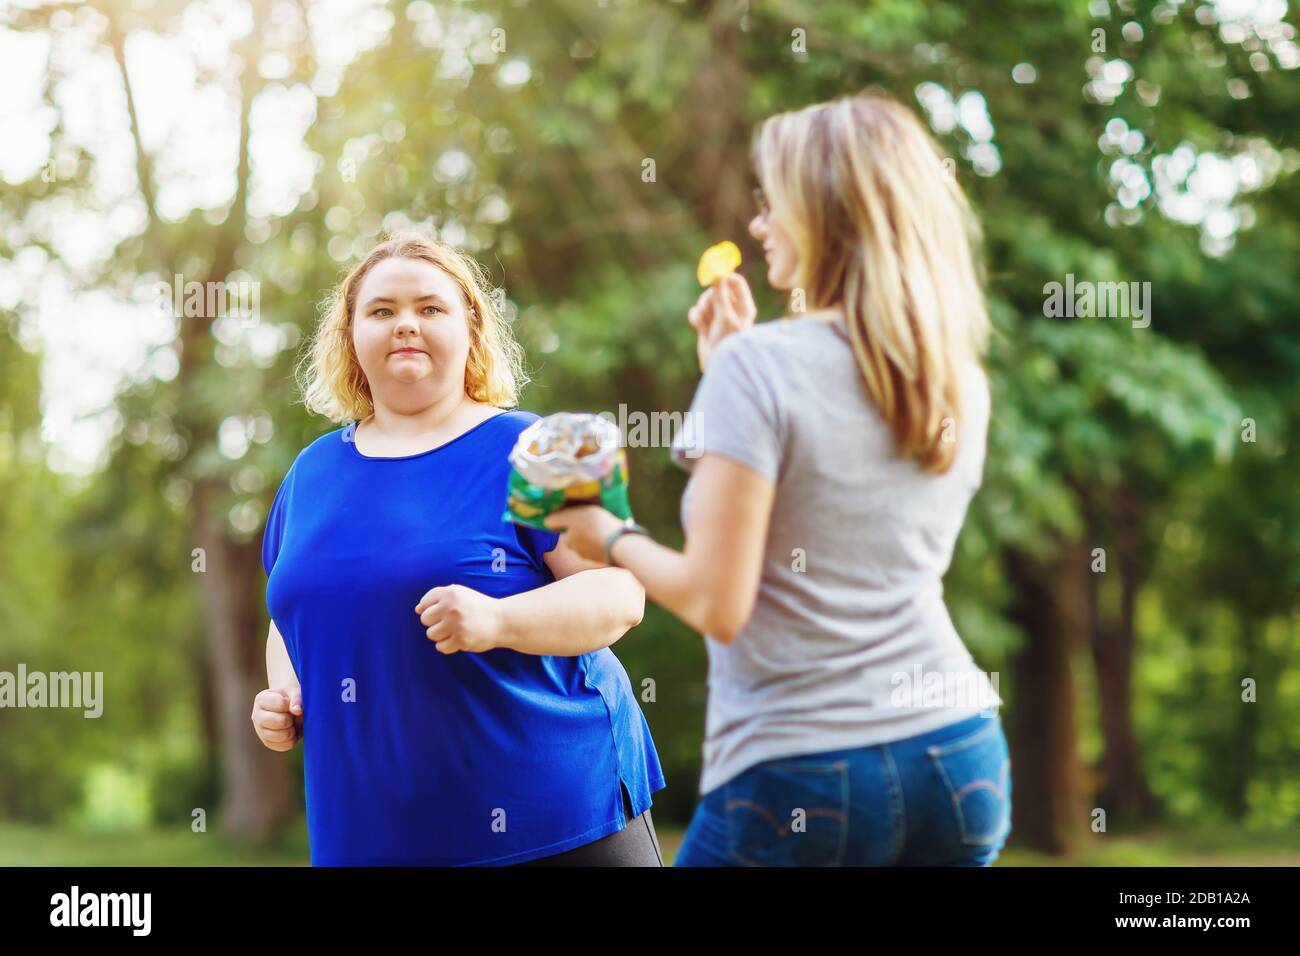 A young blonde of plus sizes runs in the park near a woman eating chips. The concept of a healthy lifestyle and self-improvement Stock Photo